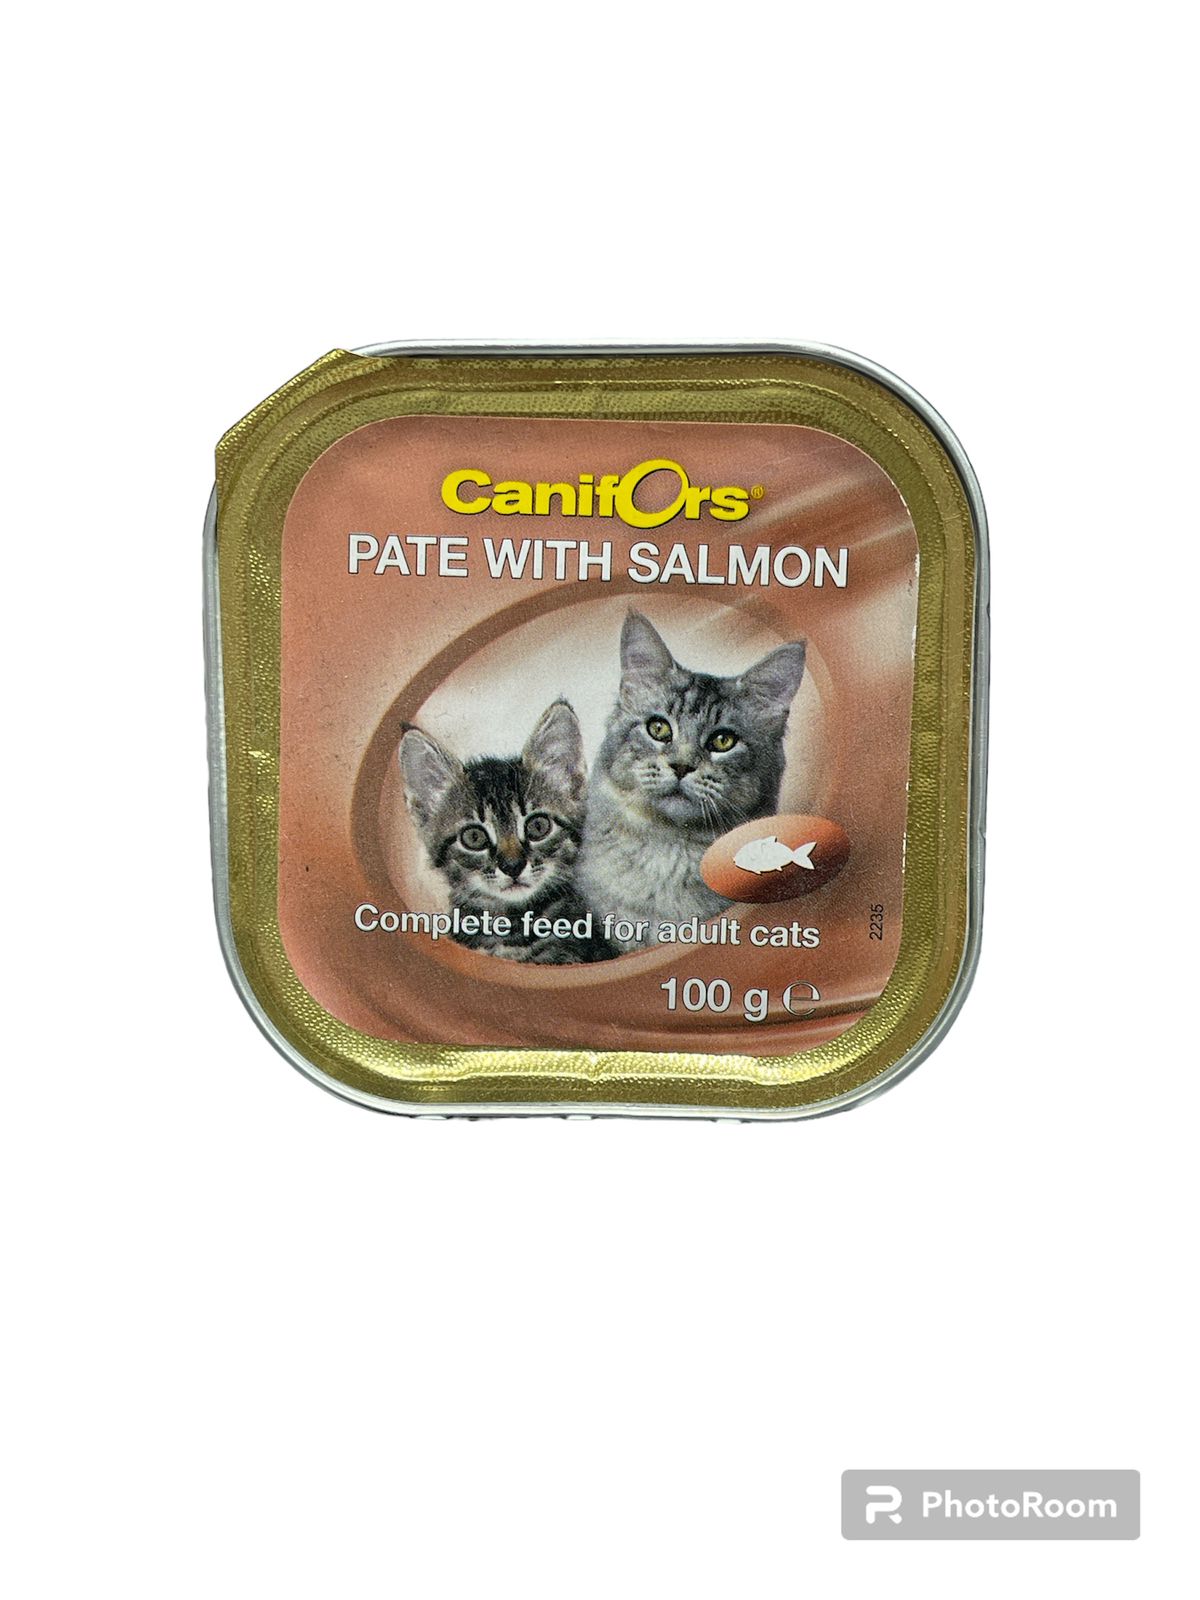 Canifors Pate with Salmon - 100g